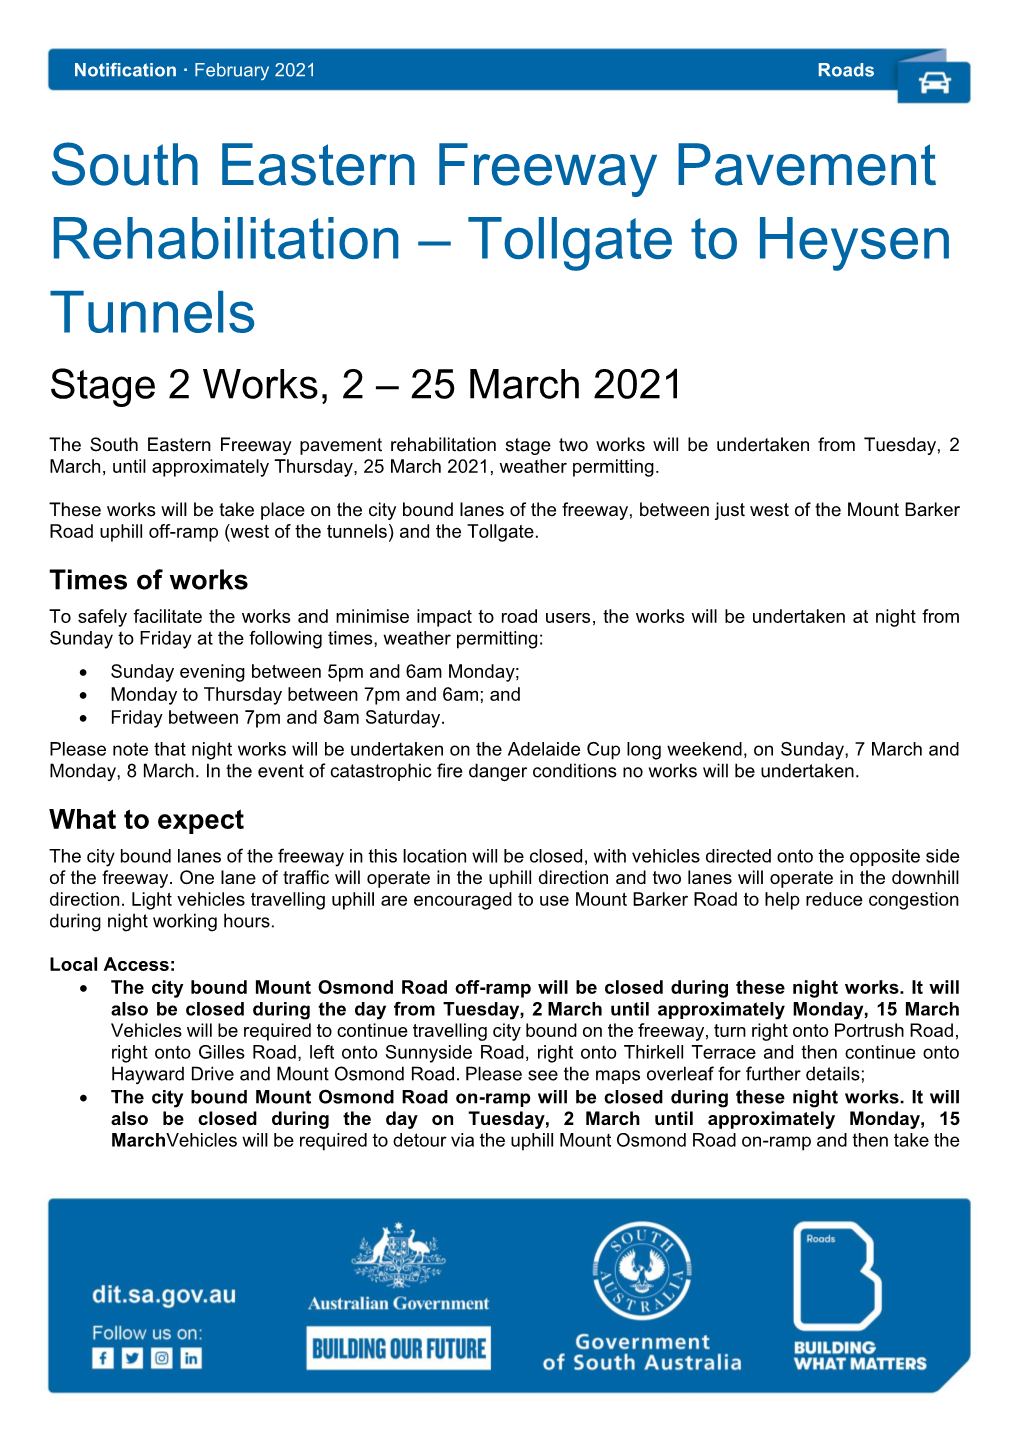 South Eastern Freeway Pavement Rehabilitation – Tollgate to Heysen Tunnels Stage 2 Works, 2 – 25 March 2021